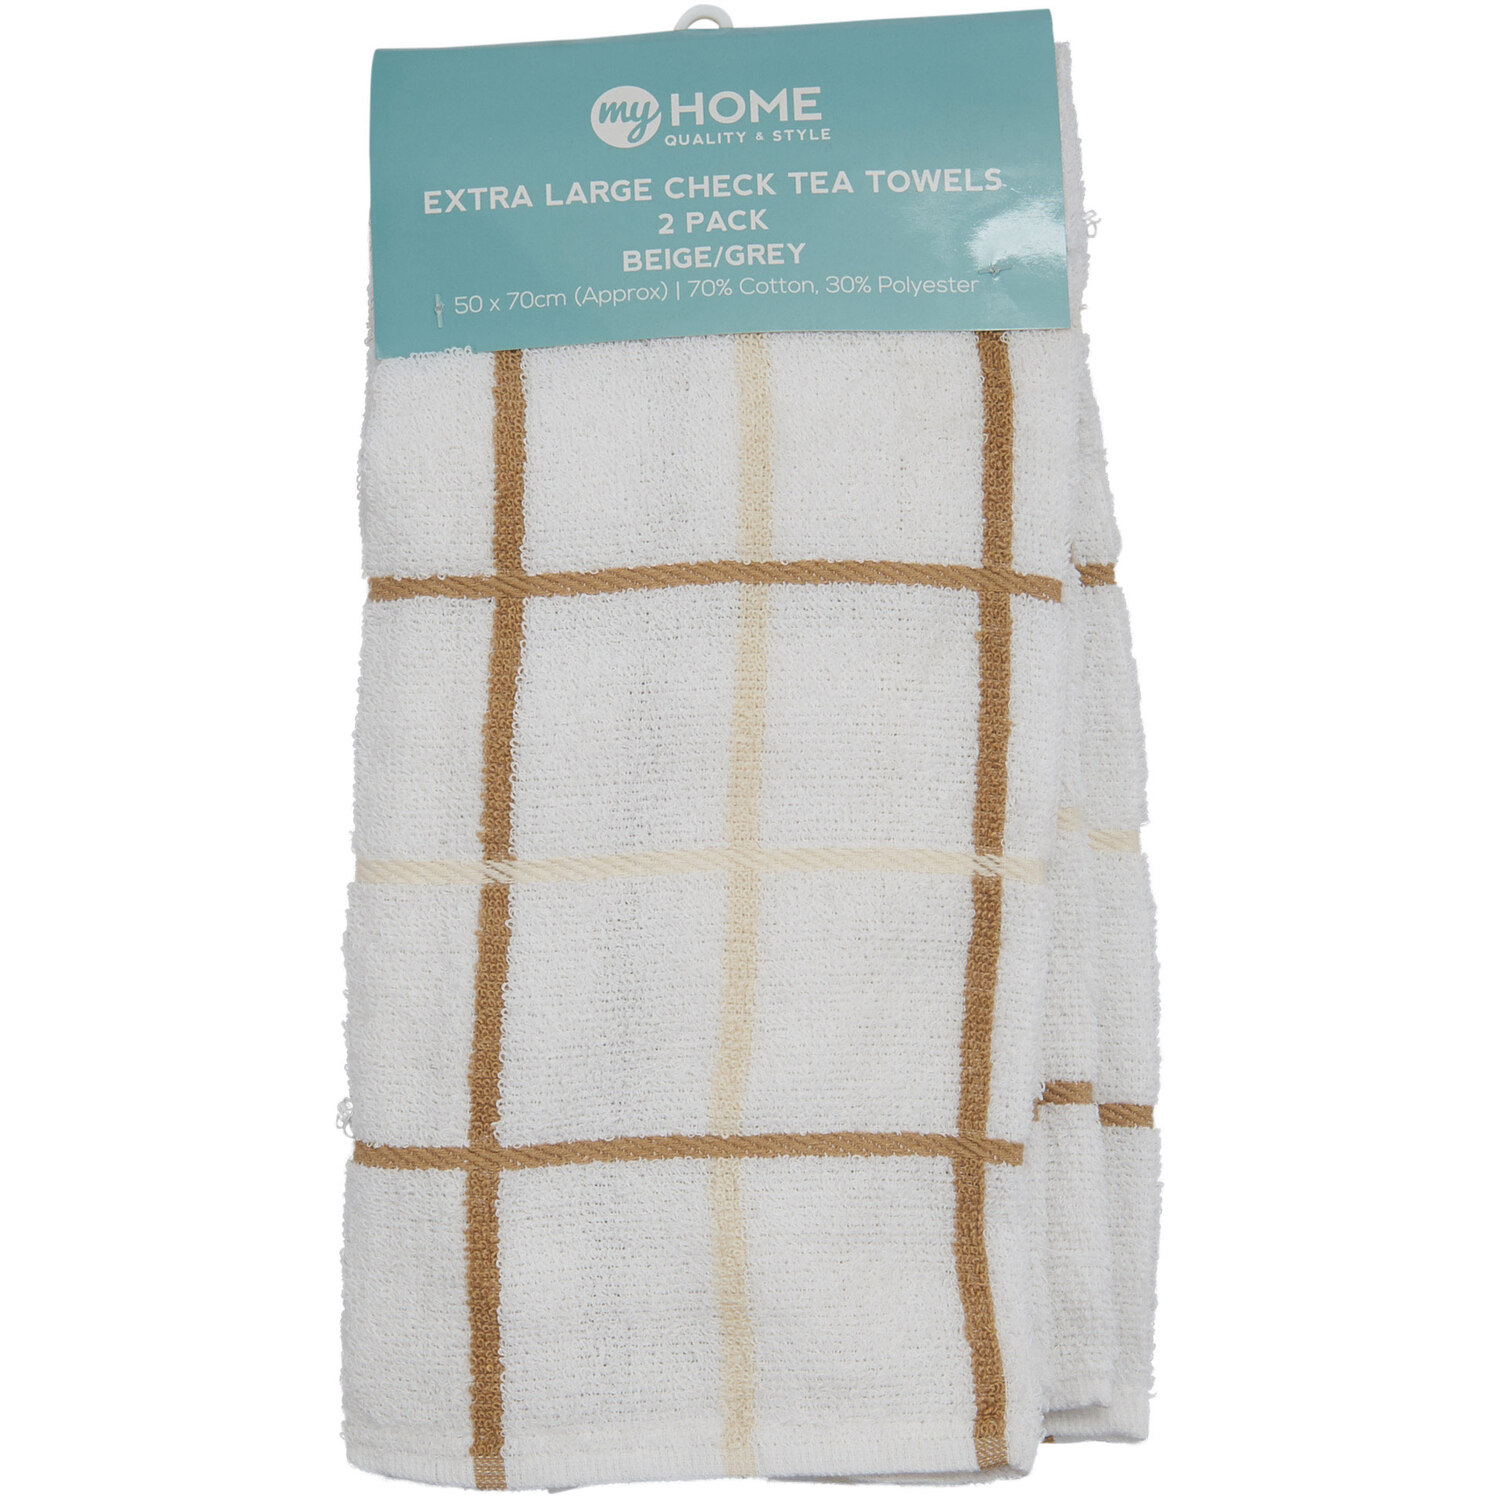 Pack of 2 Extra Large Check Tea Towels - Beige/Grey Image 1